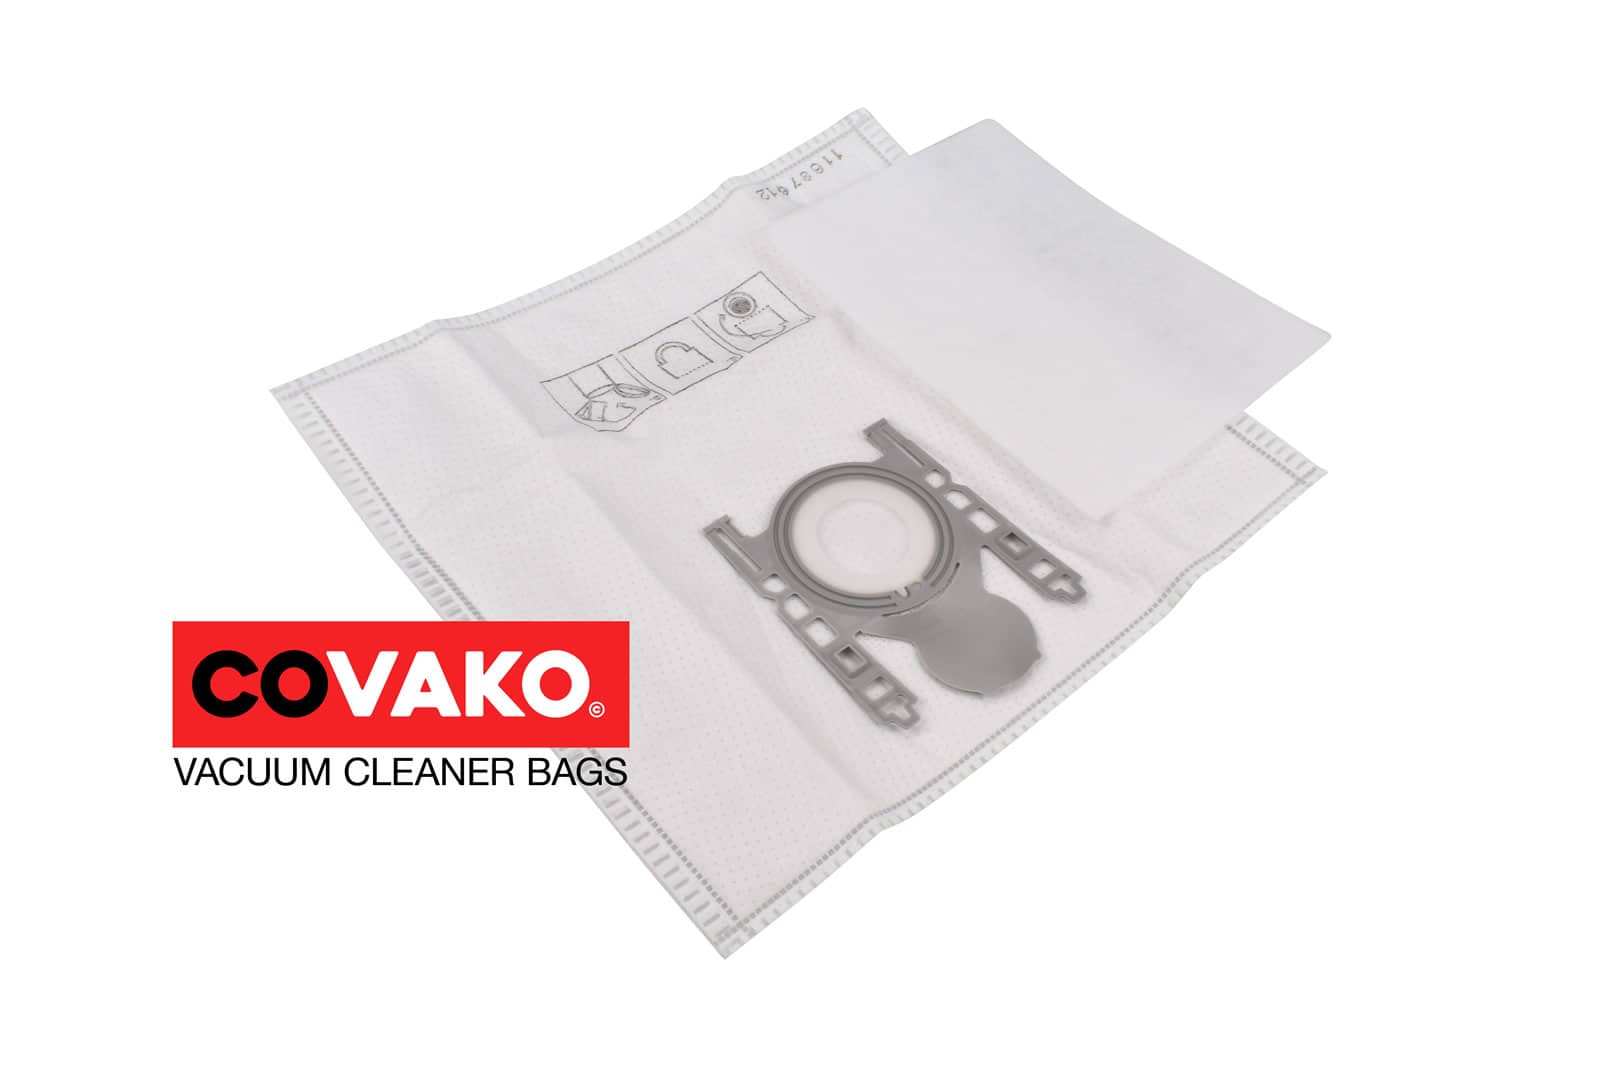 Bosch BBS 2000-2299 / Synthesis - Bosch vacuum cleaner bags